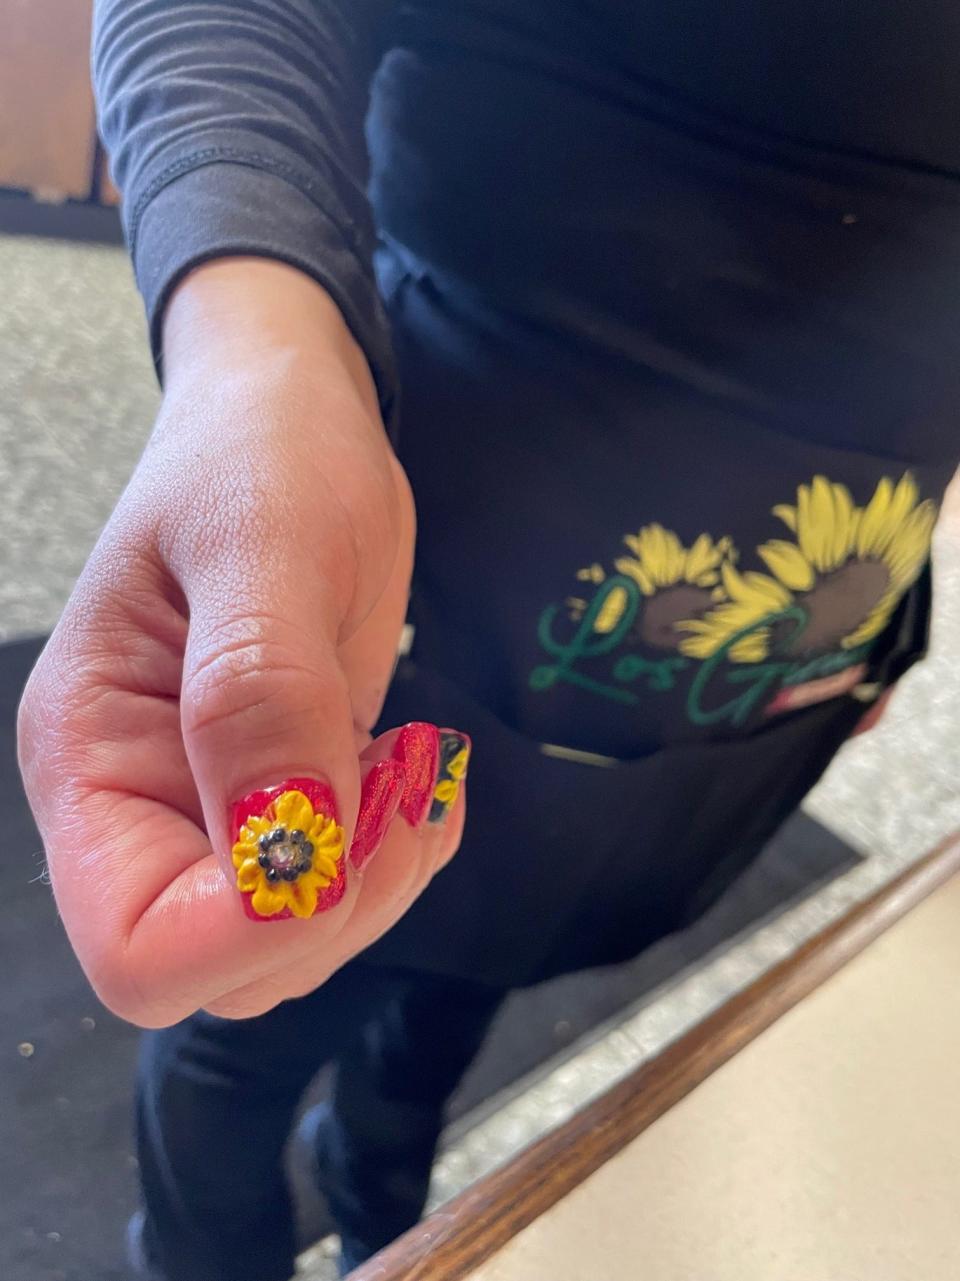 A server at Los Girasoles restaurant shows off her manicure, Feb. 27, 2022.